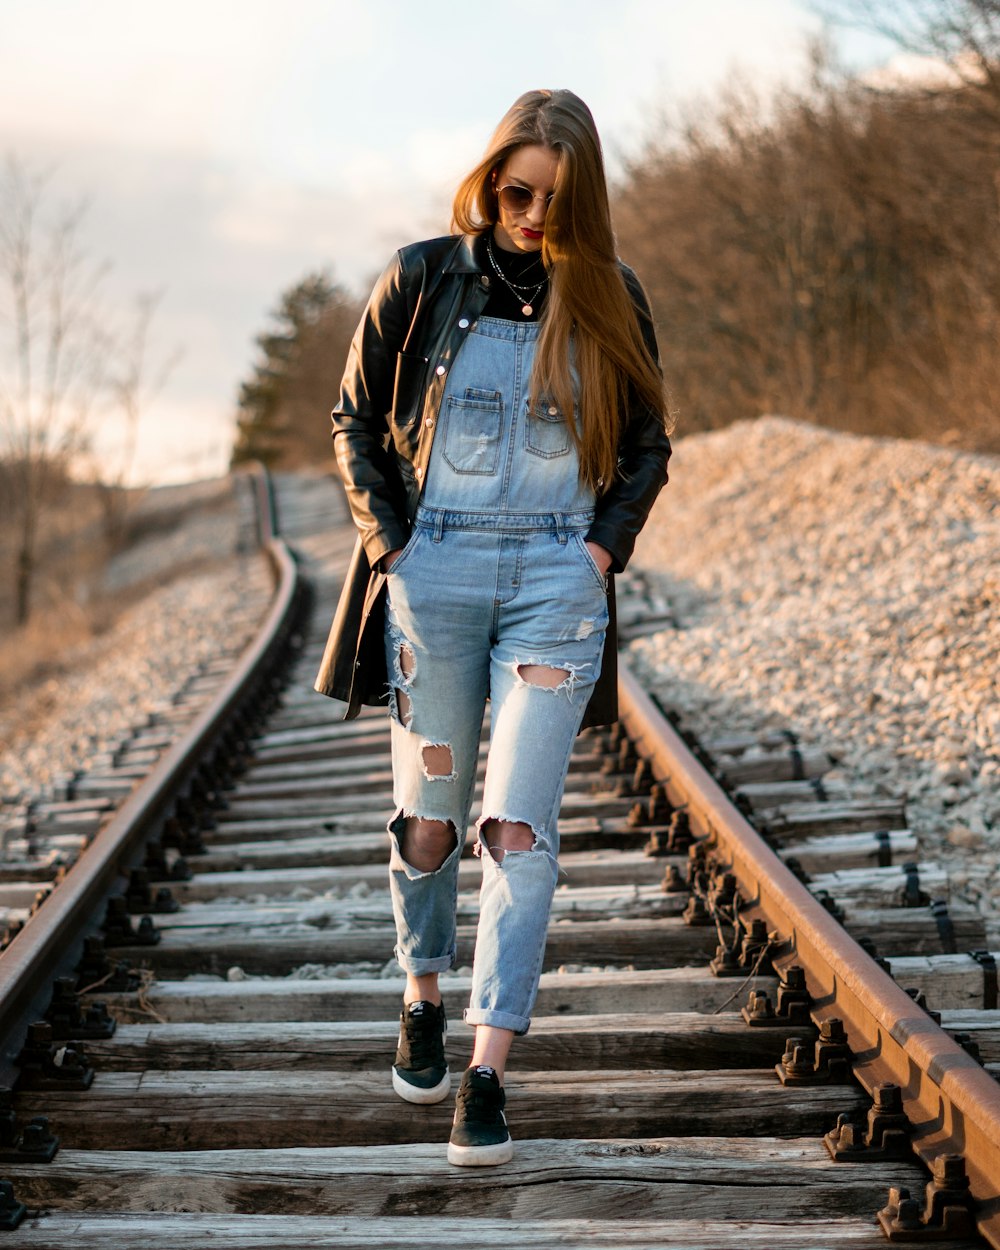 woman in blue denim jacket and blue denim jeans standing on brown wooden train rail during